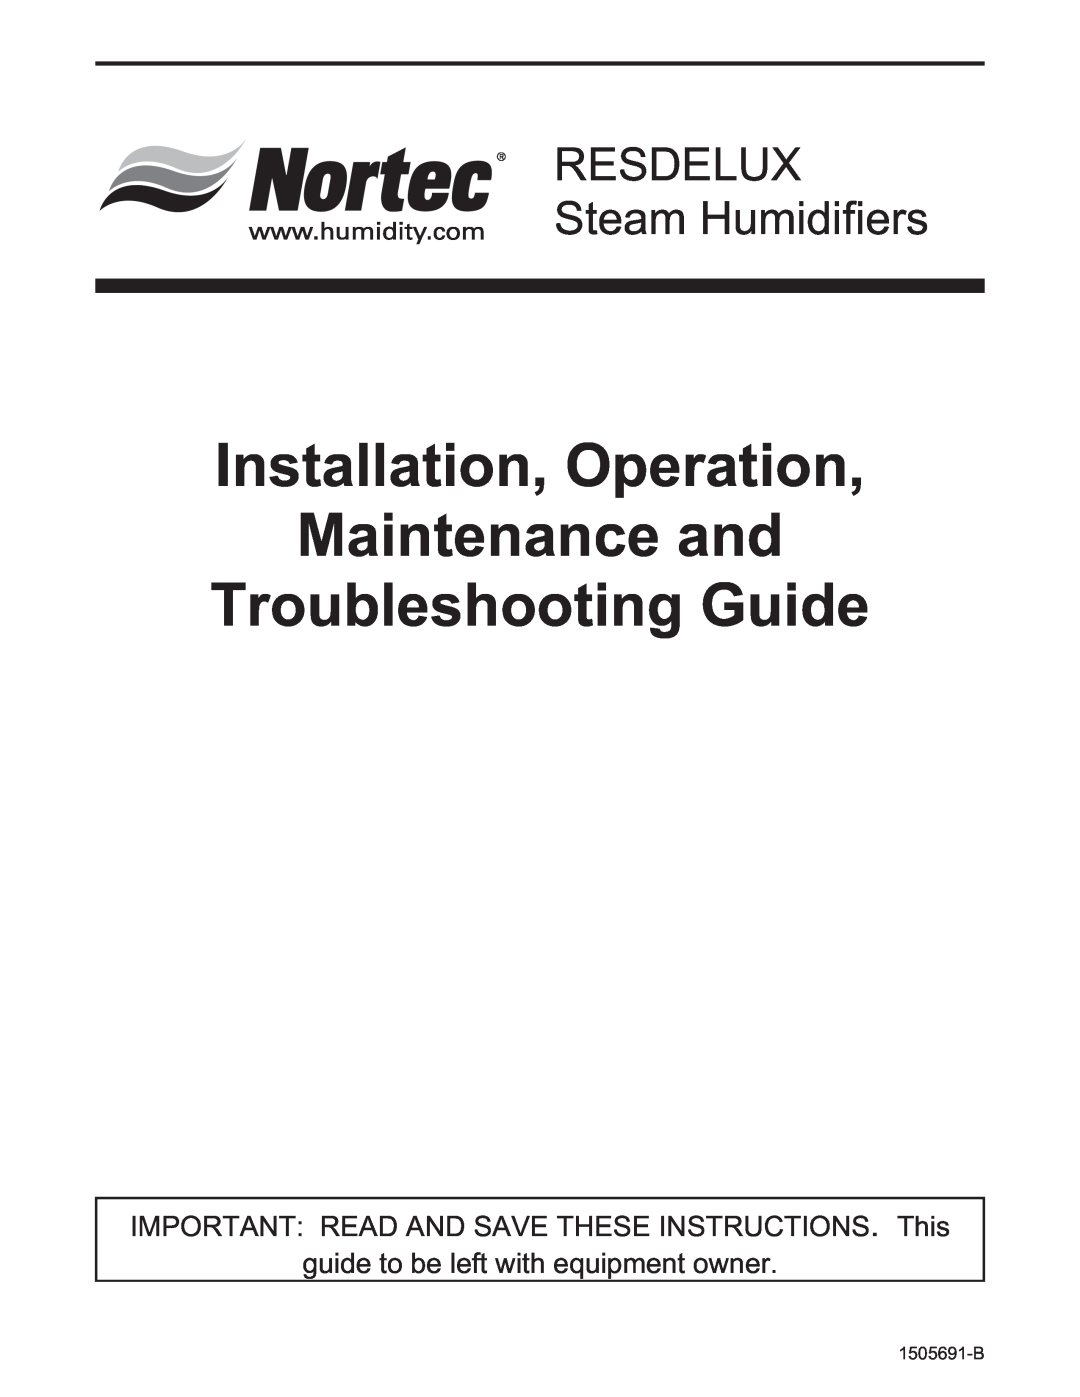 Nortec manual Installation, Operation Maintenance and, Troubleshooting Guide, RESDELUX Steam Humidifiers 